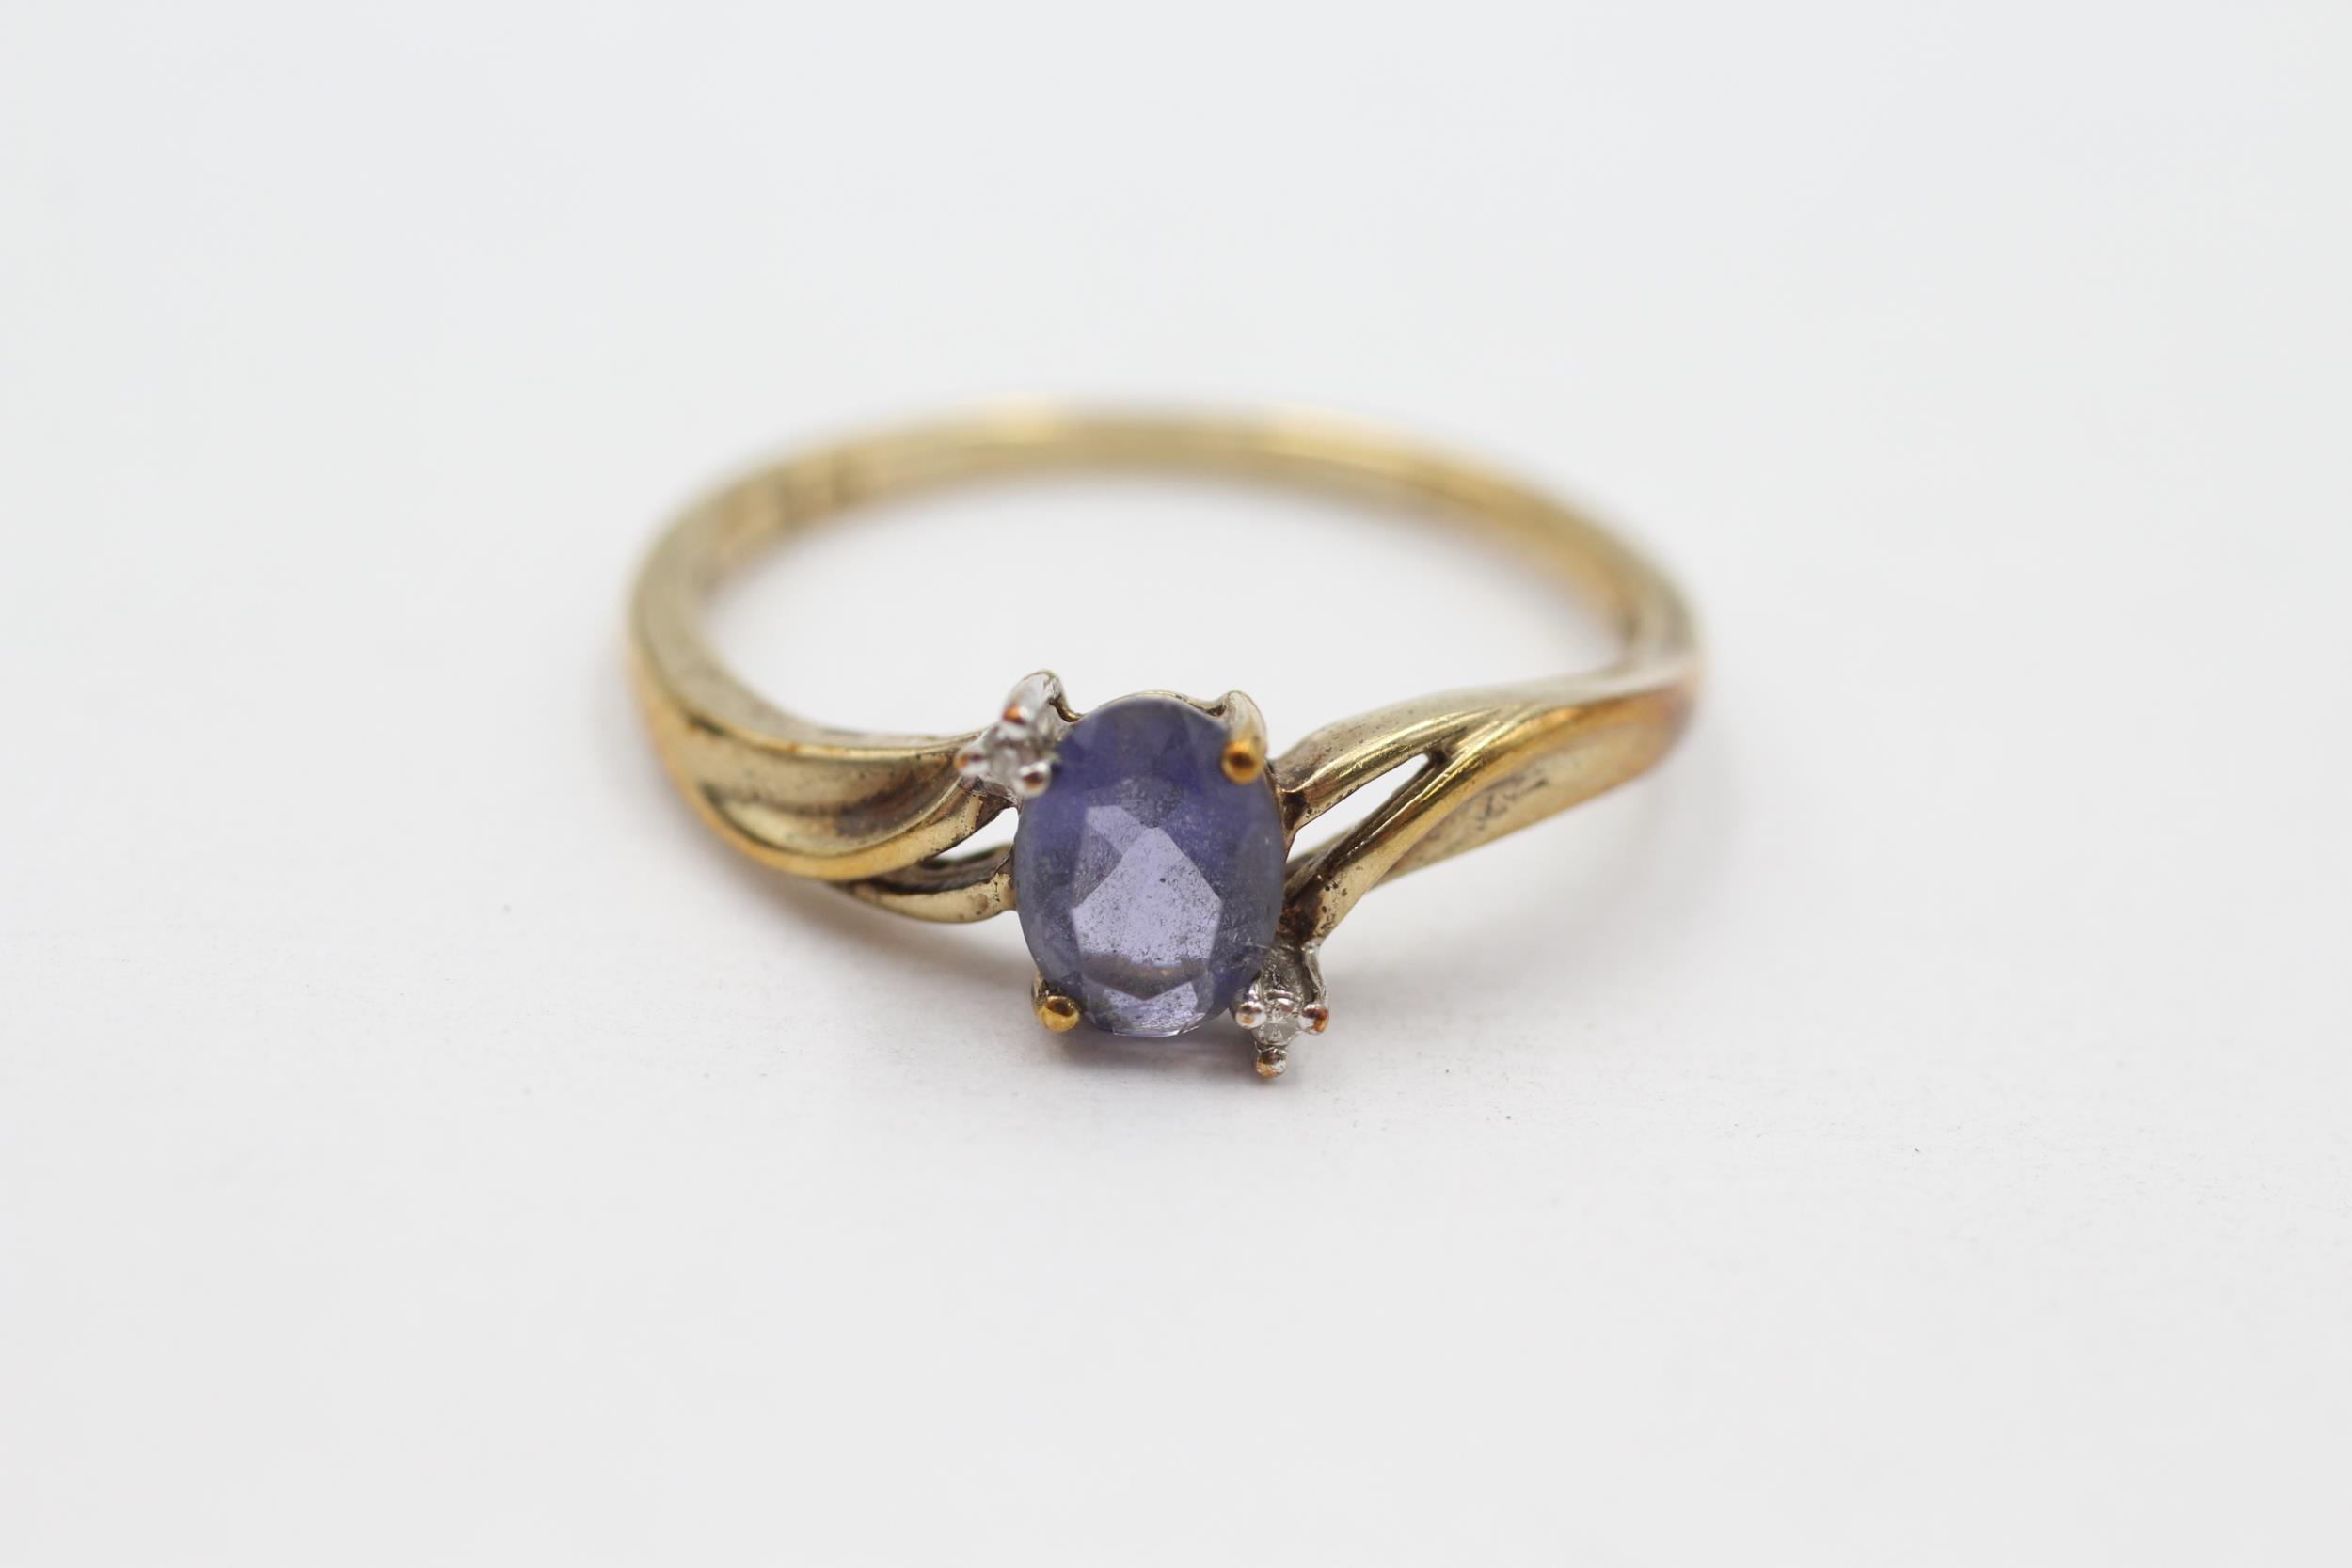 9ct gold oval cut iolite & diamond ring Size S - 2 g